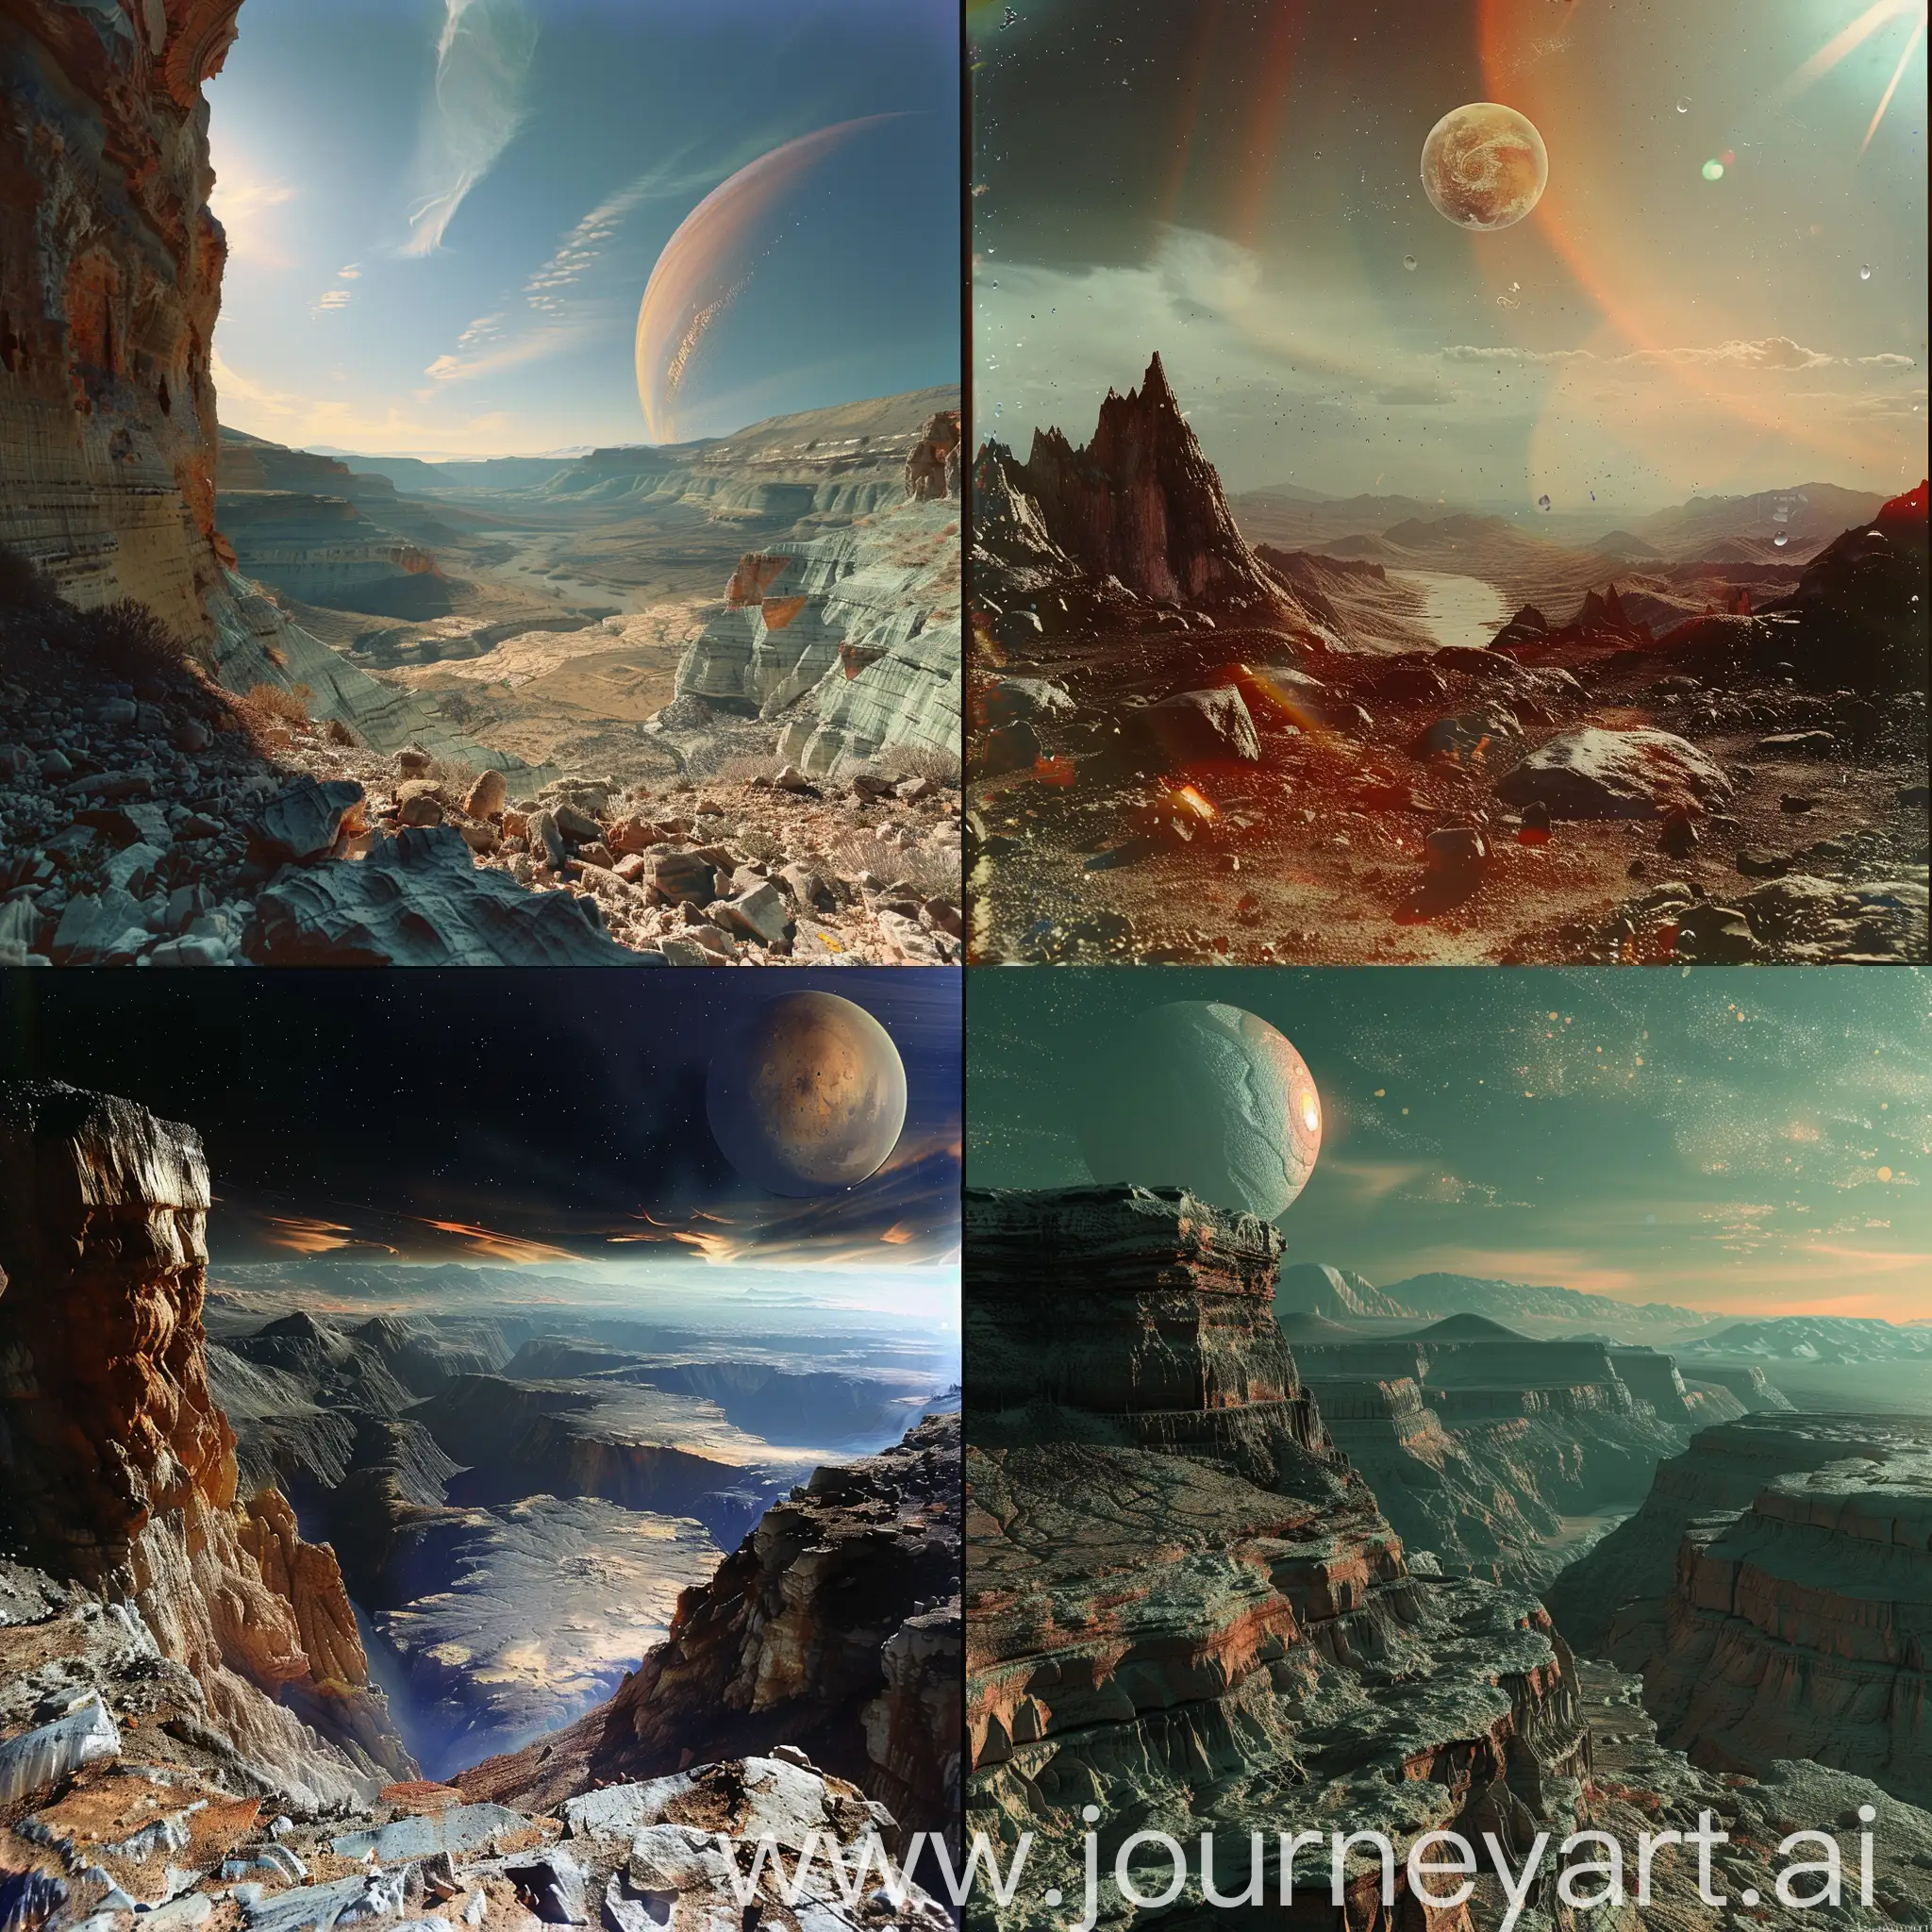 an 26mm photo of a breathtaking landscape from an alien planet, that is far away from earth